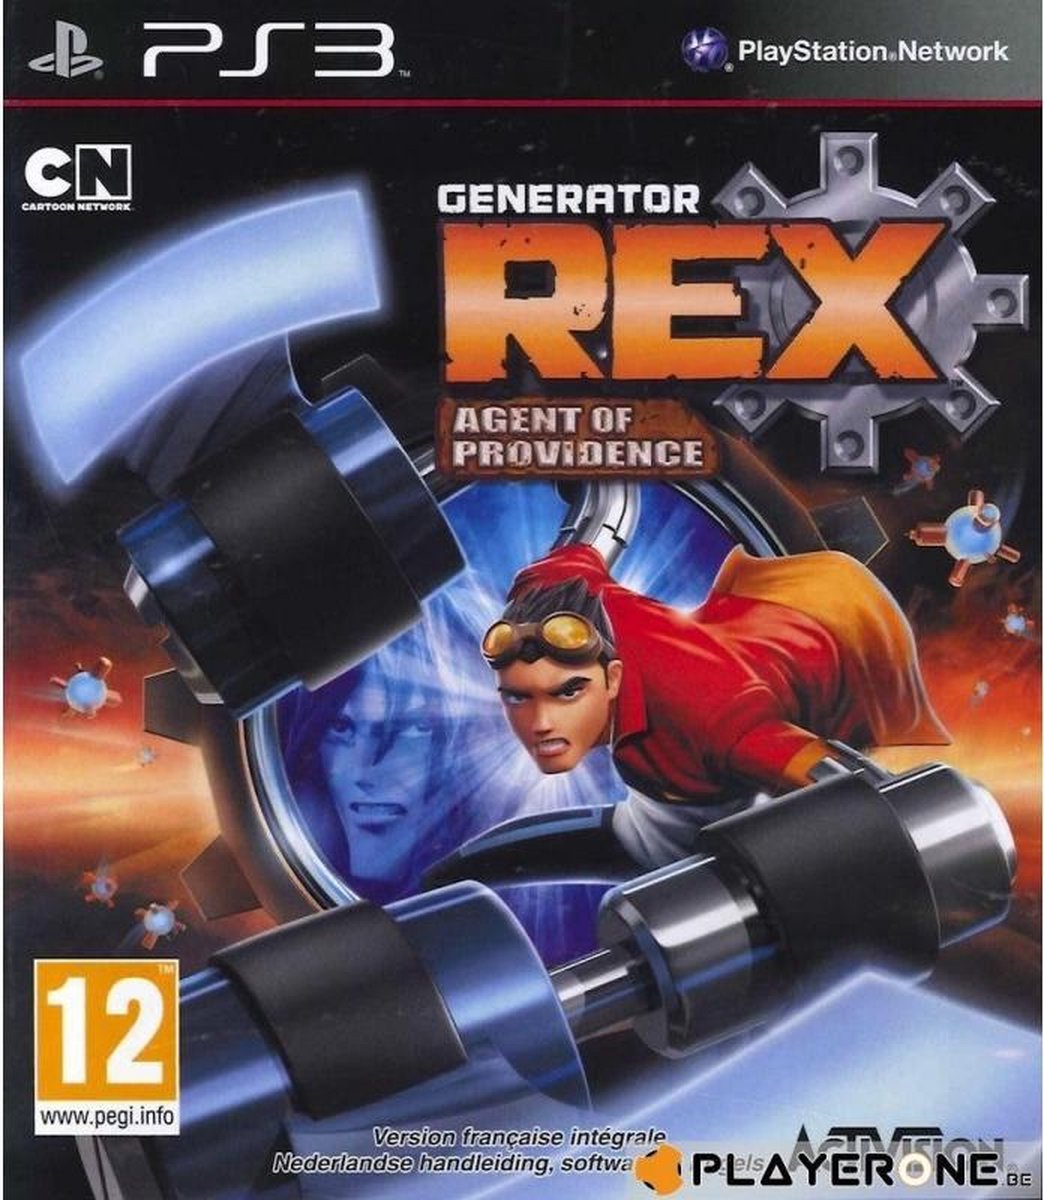 Activision Generator Rex Agent of Providence